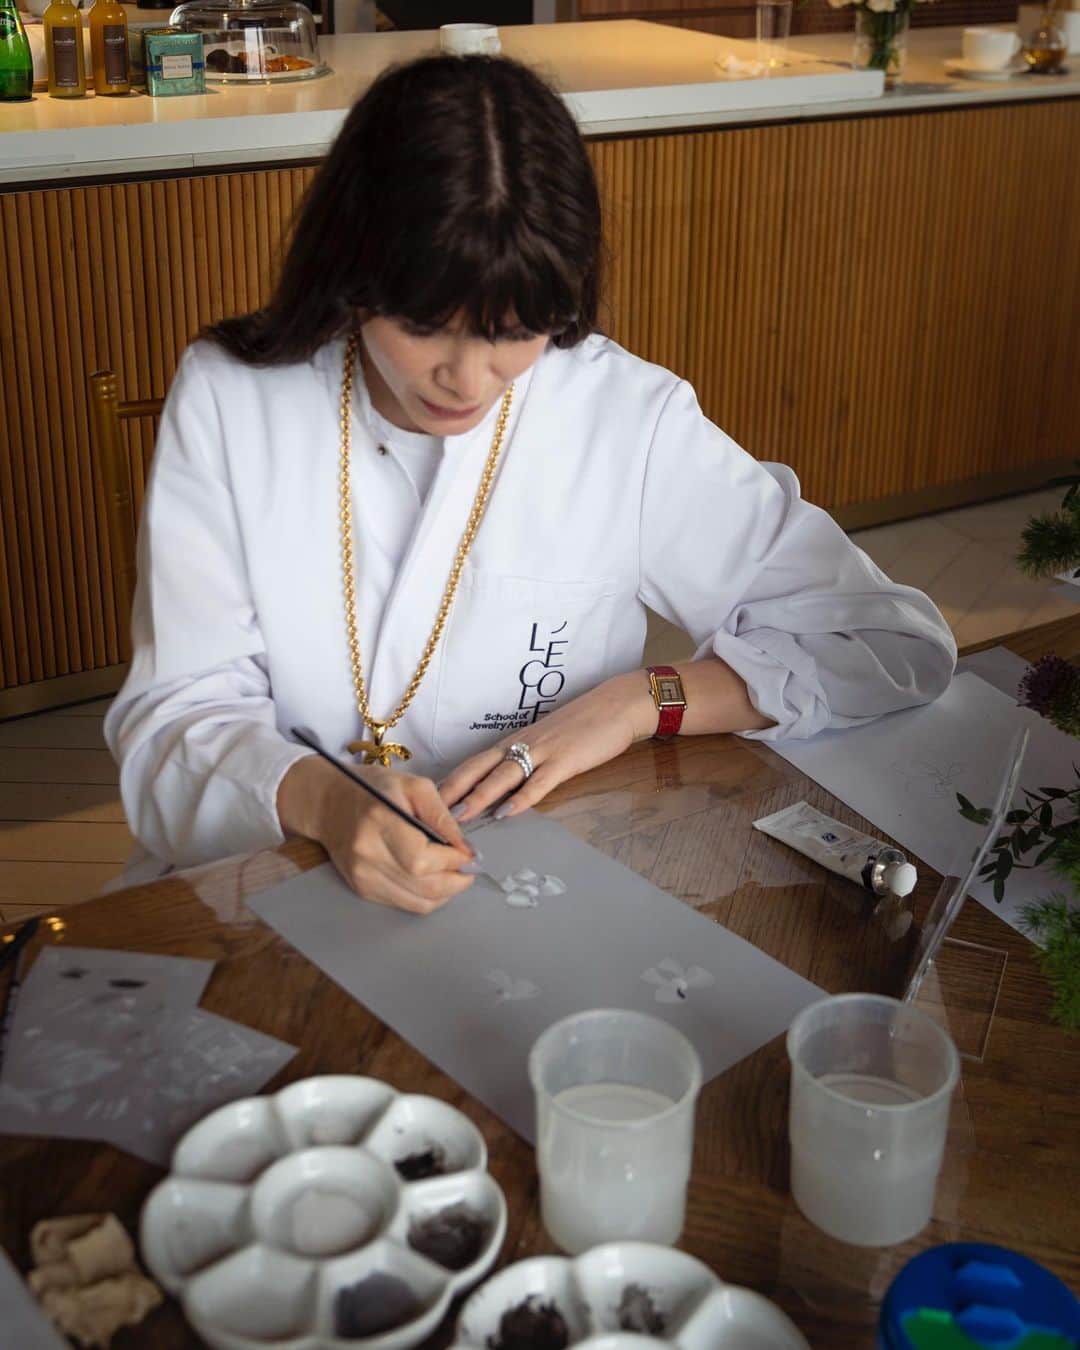 RJMStyleのインスタグラム：「Last week I completed part 1 of THE GOUACHÉ IN HIGH JEWELRY course THE LIGHT 💡   We learnt how to depict light using gouaché painting, the first stage in creating a High Jewelry piece.  After a presentation of the gouaché technique we painted a white gold piece in the shape of a bow. We used white, black and grey to create shadow and hi-lights.   The view from our class room was a pretty rooftop garden and #HongKong skyline. and within our classroom upon the walls the greats from another age looked down whilst we painted .  It was such a fun and creative morning. I highly recommend.   @lecoleasiapacific  #LECOLEAsiaPacific #LECOLESchoolOfJewelryArts   @purplepr @maggiechowcm @kieranho」